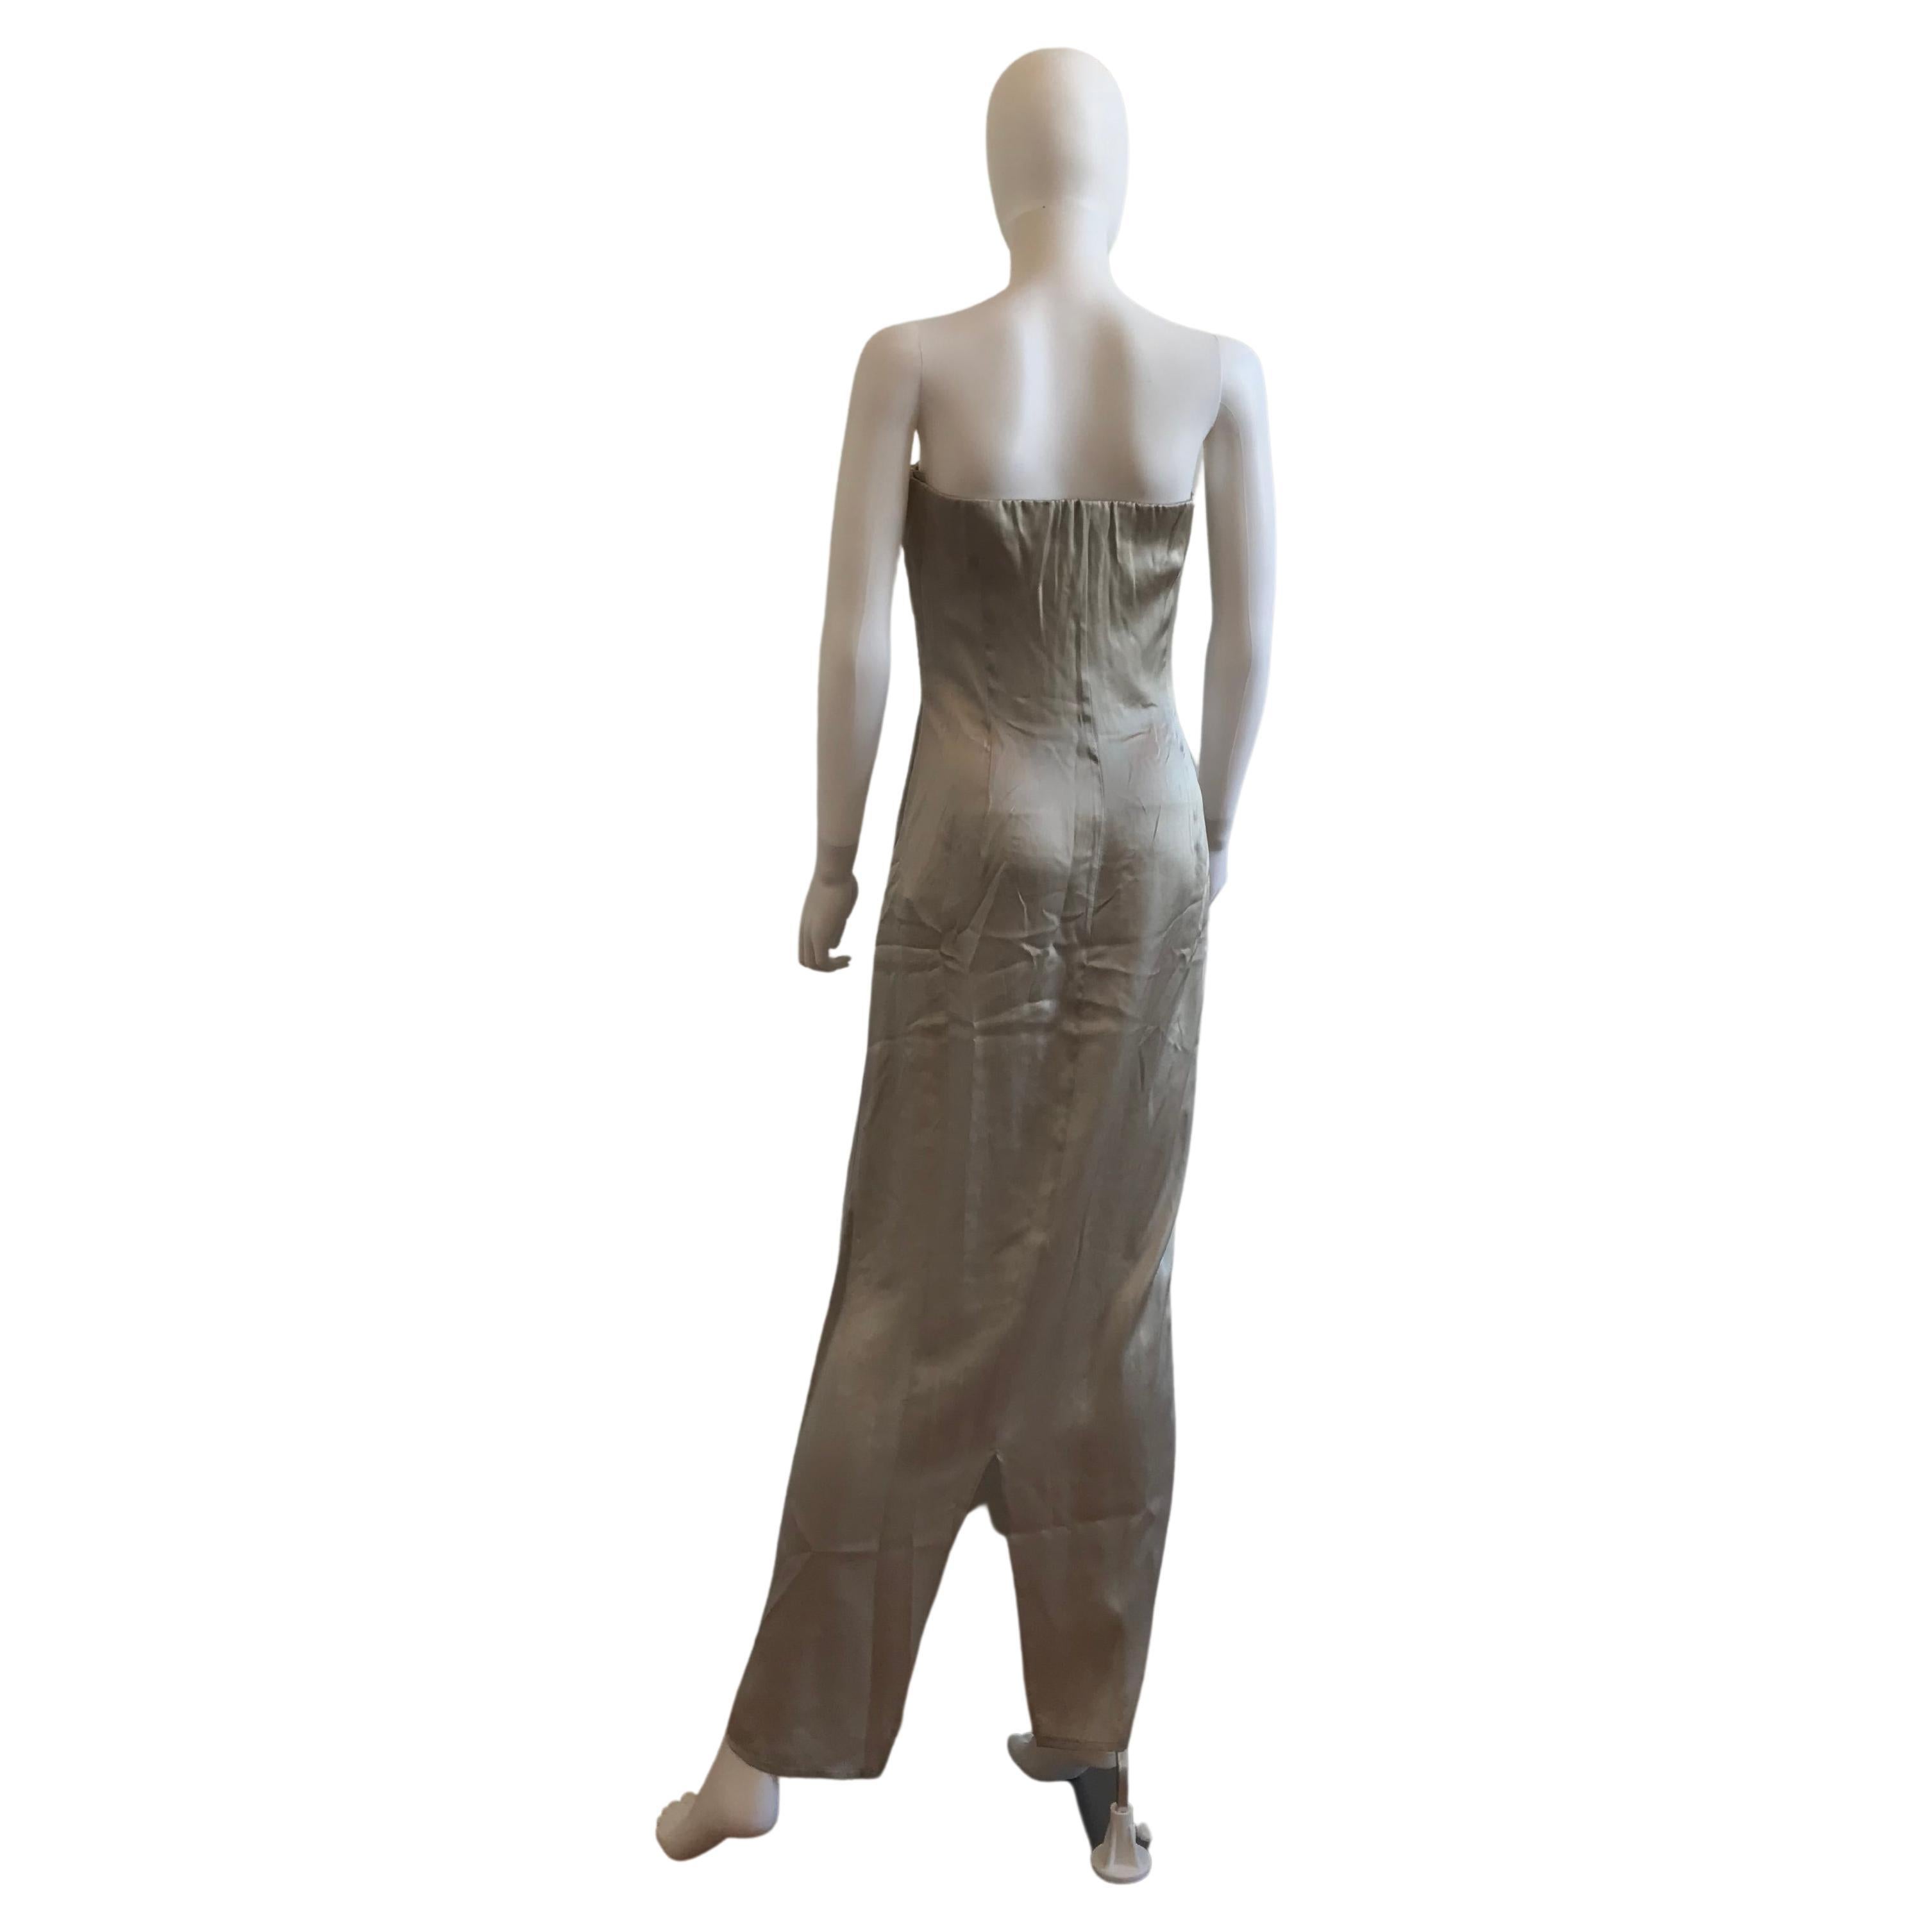 FW 1998 Gianfranco Ferre Metallic Embroidered Tulle Evening Gown In Good Condition For Sale In Brooklyn, NY